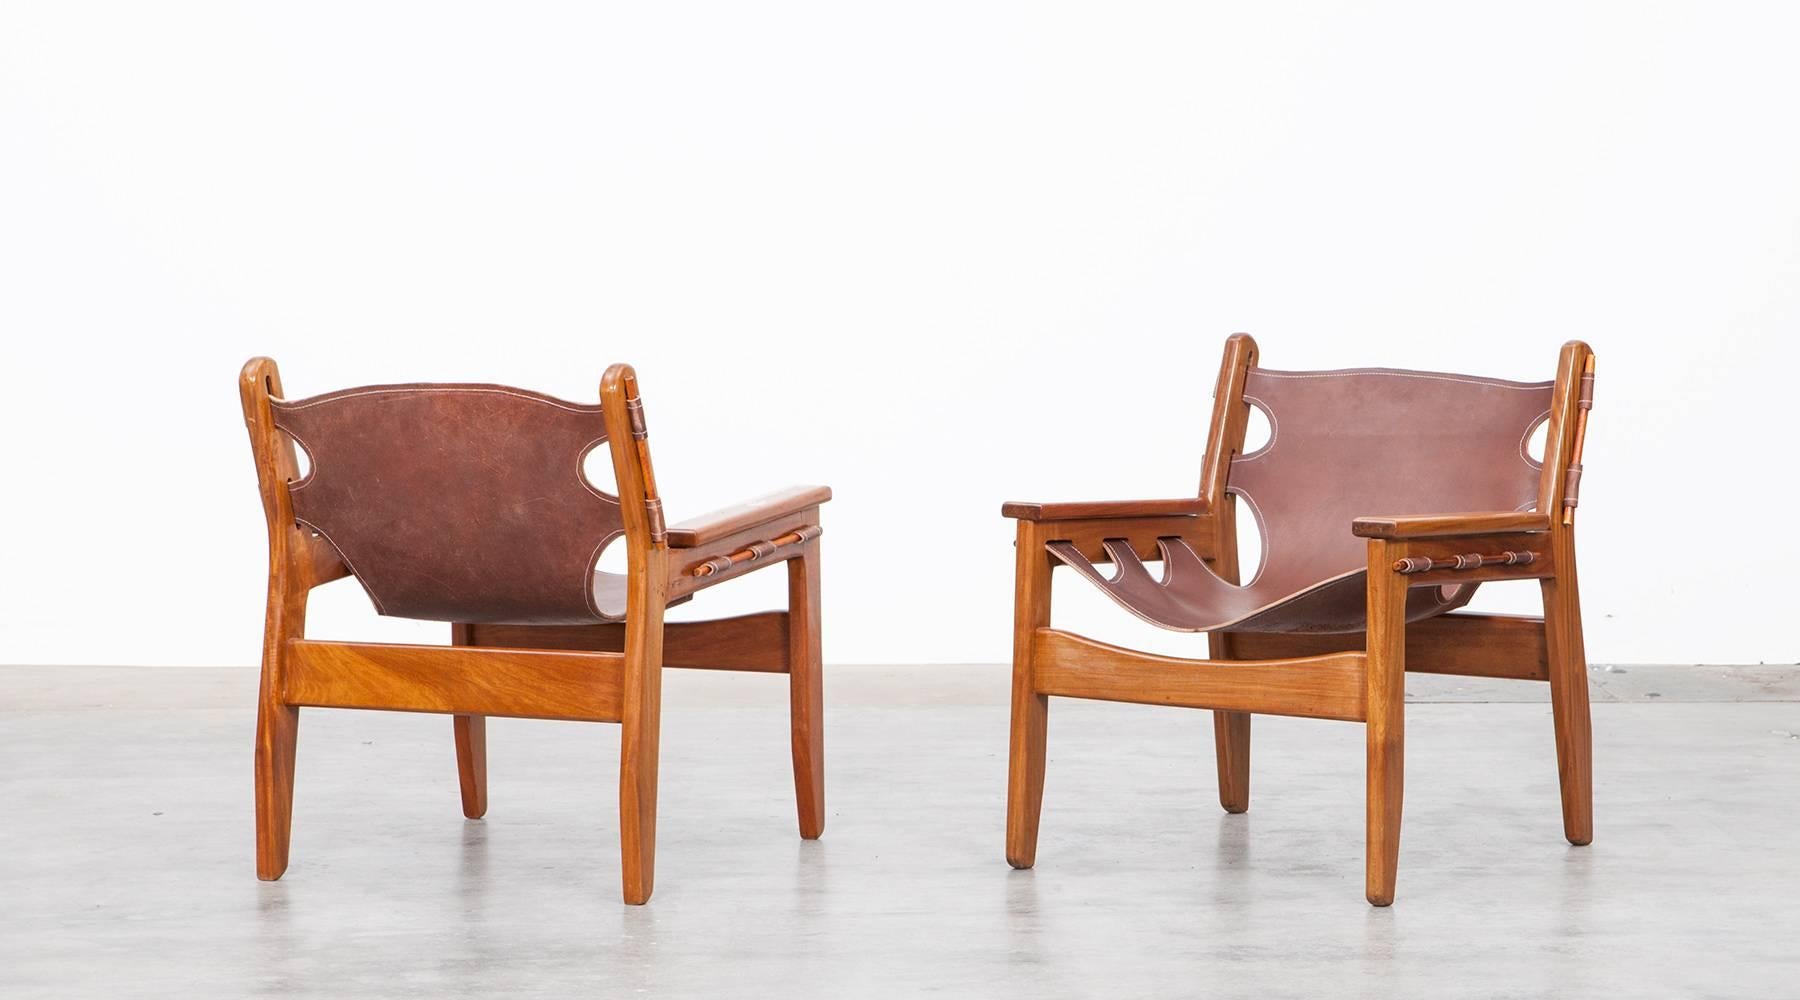 Beautiful Brazilian solid  wooden and leather Kilin lounge chairs designed by Sergio Rodrigues in 1973. The original and nicely aged leather sling seat has a great patina and looks beautiful in contrast with the warm wooden frame. The frames are in